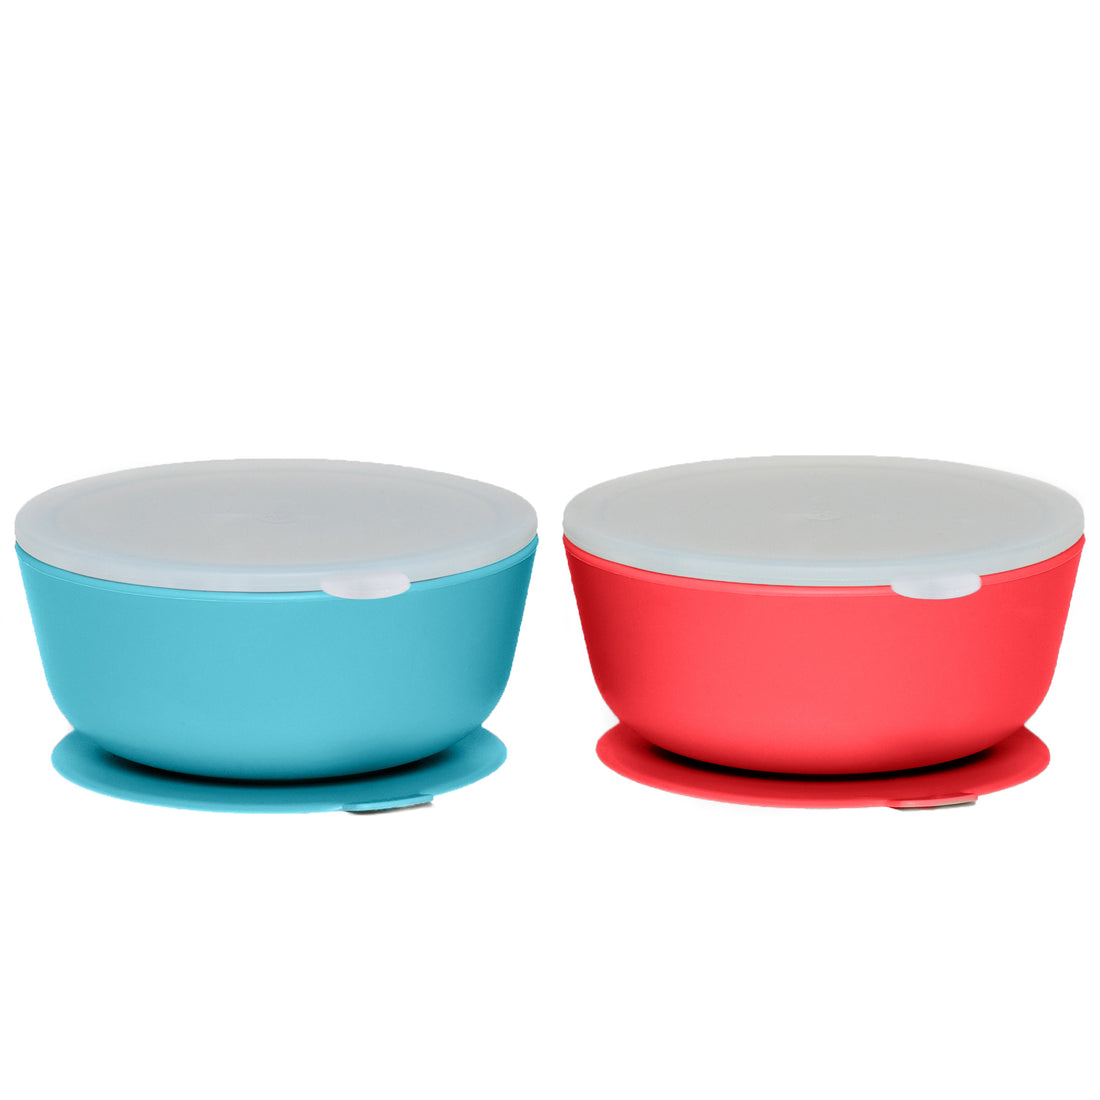 Tupperware Microwavable Bowls and Lids 22 